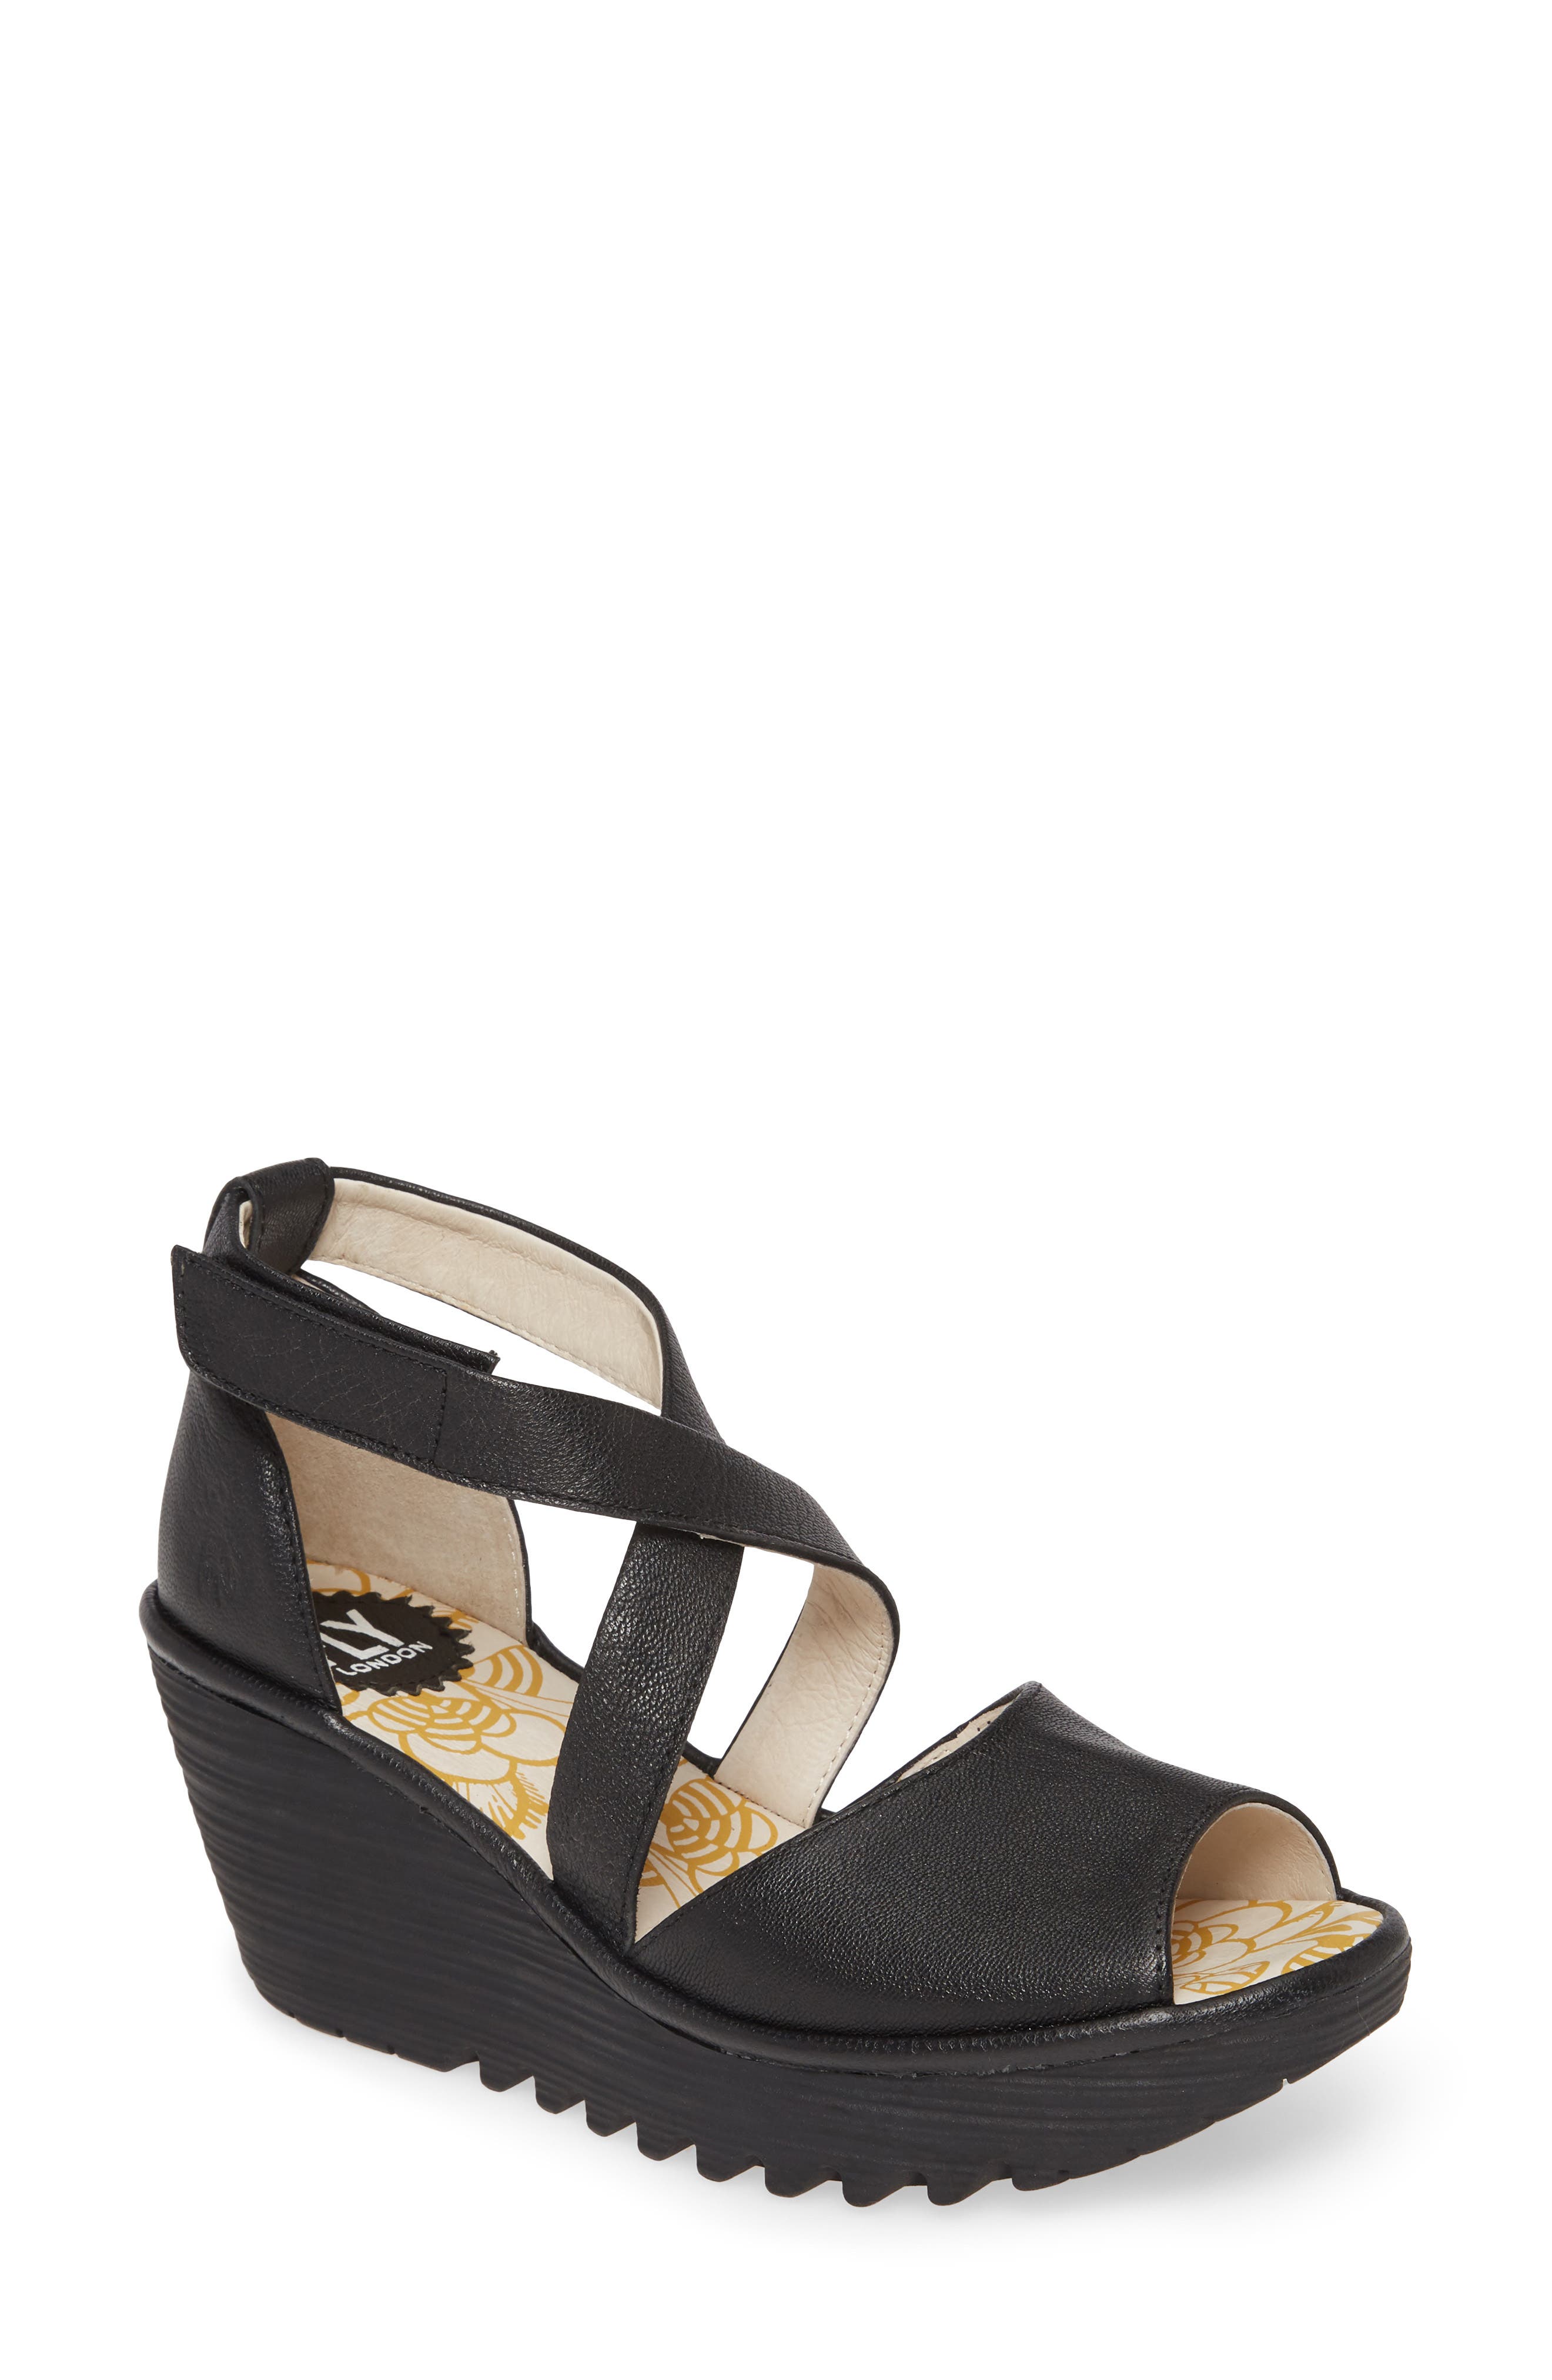 fly london sandals on sale